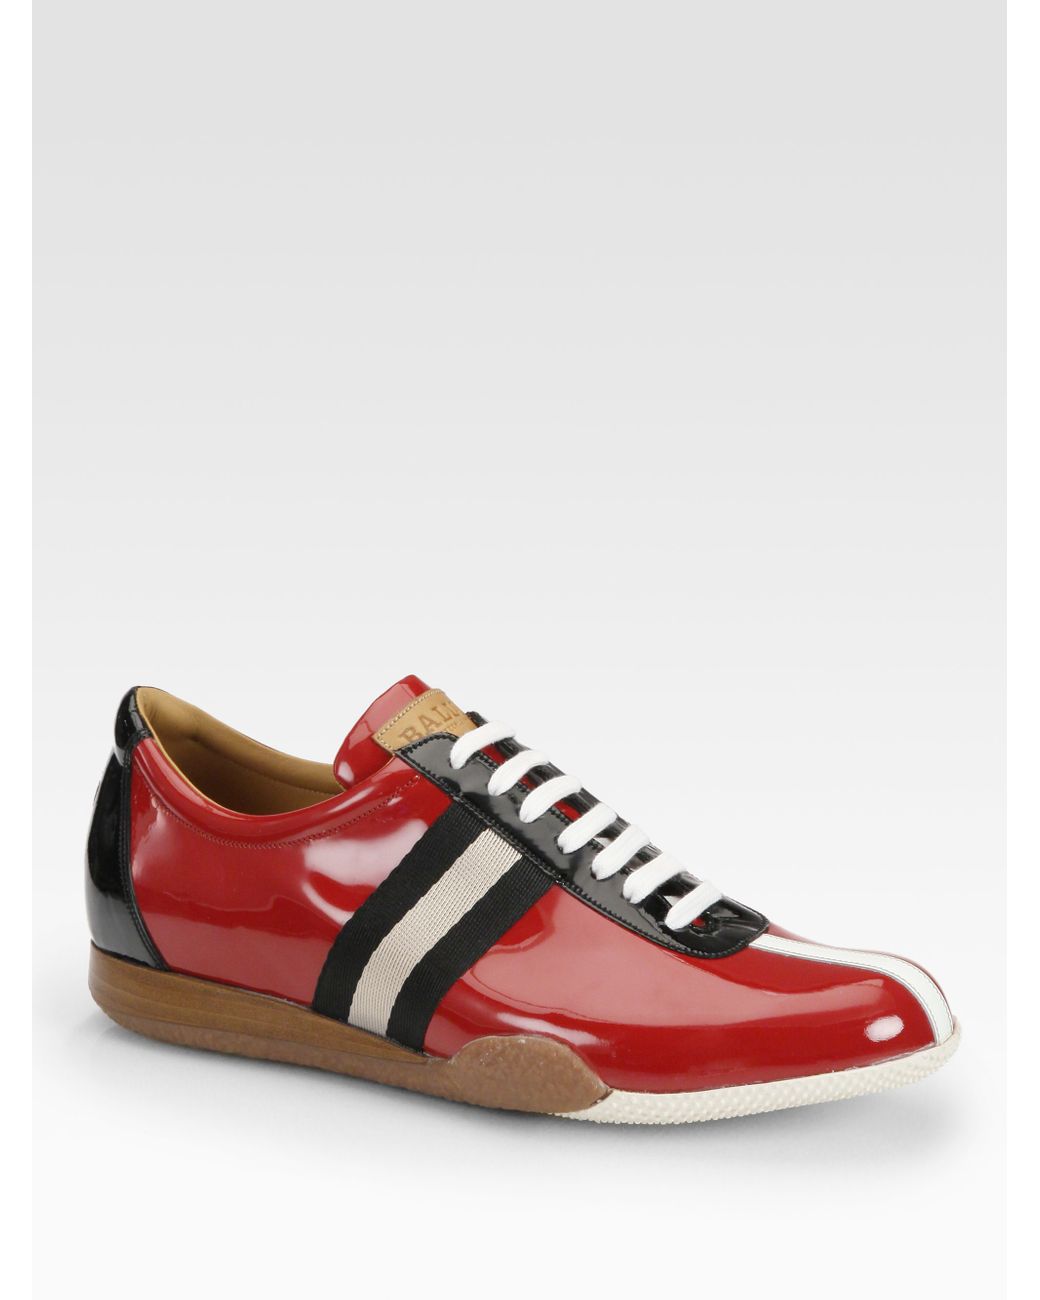 Bally Freenew Patent Leather Sneakers in Red for Men | Lyst